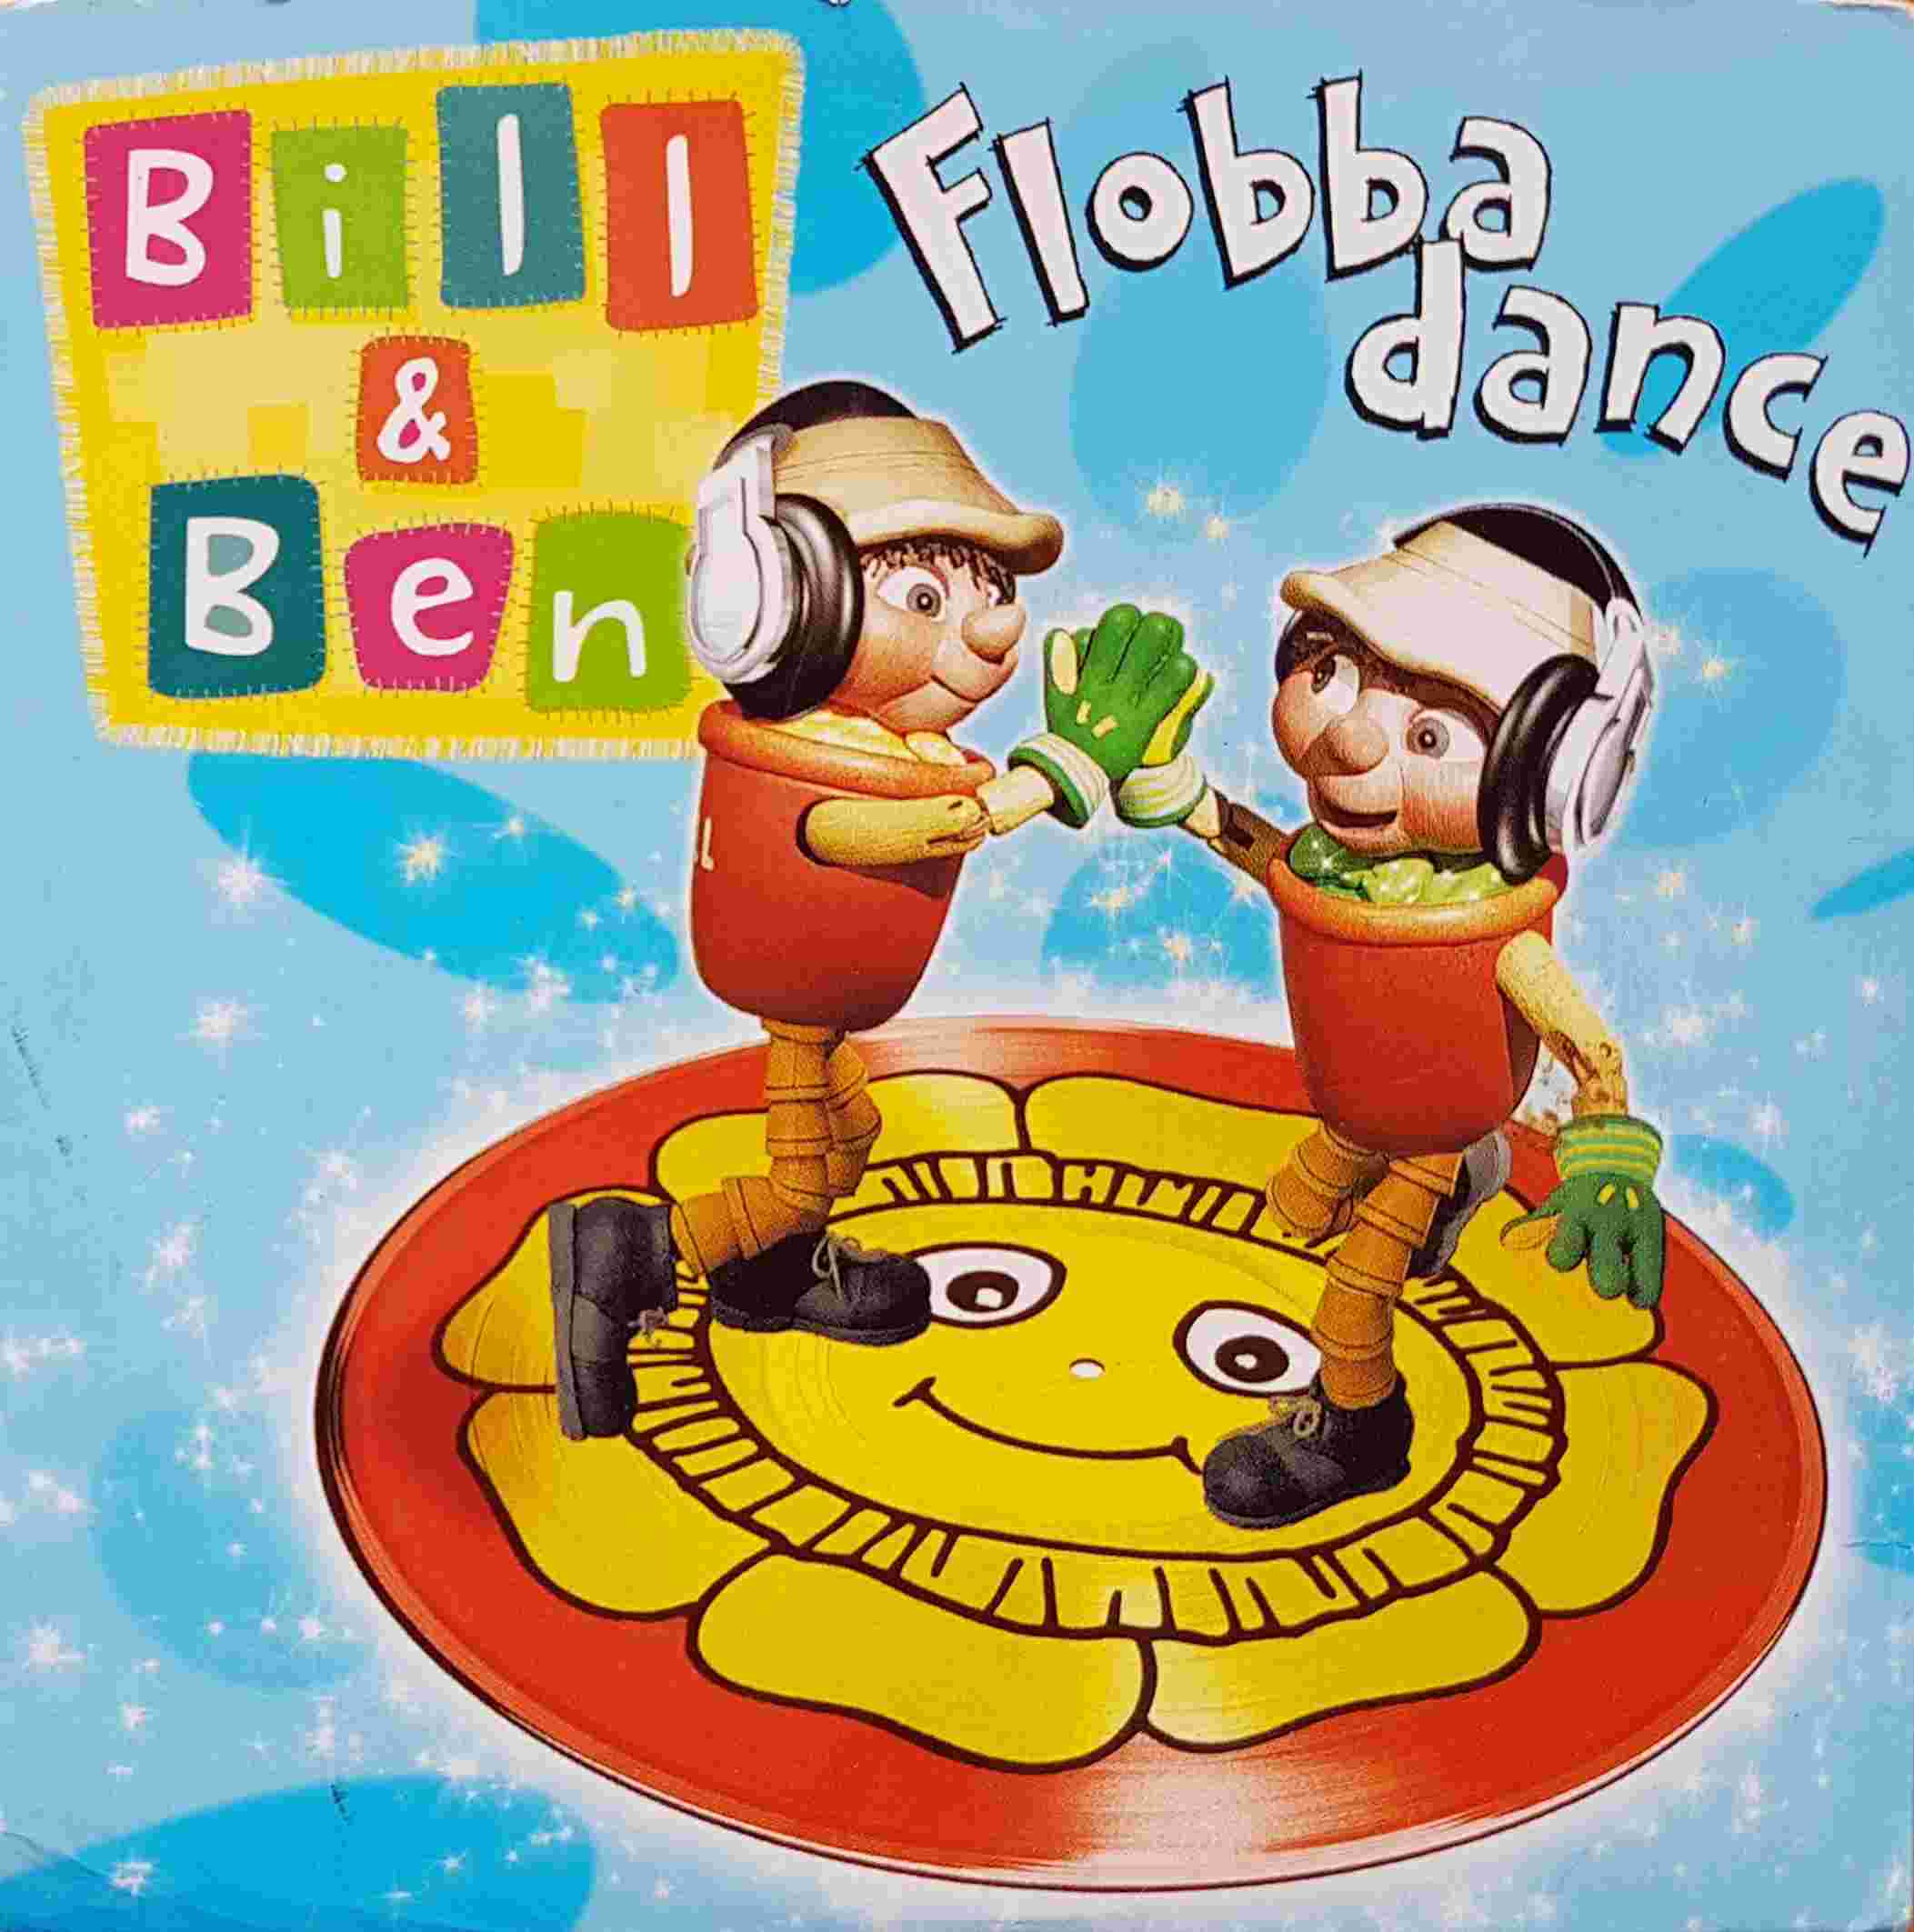 Picture of FLOBBA001 Flobbadance by artist Bill & Ben / Nico Dean from the BBC cdsingles - Records and Tapes library